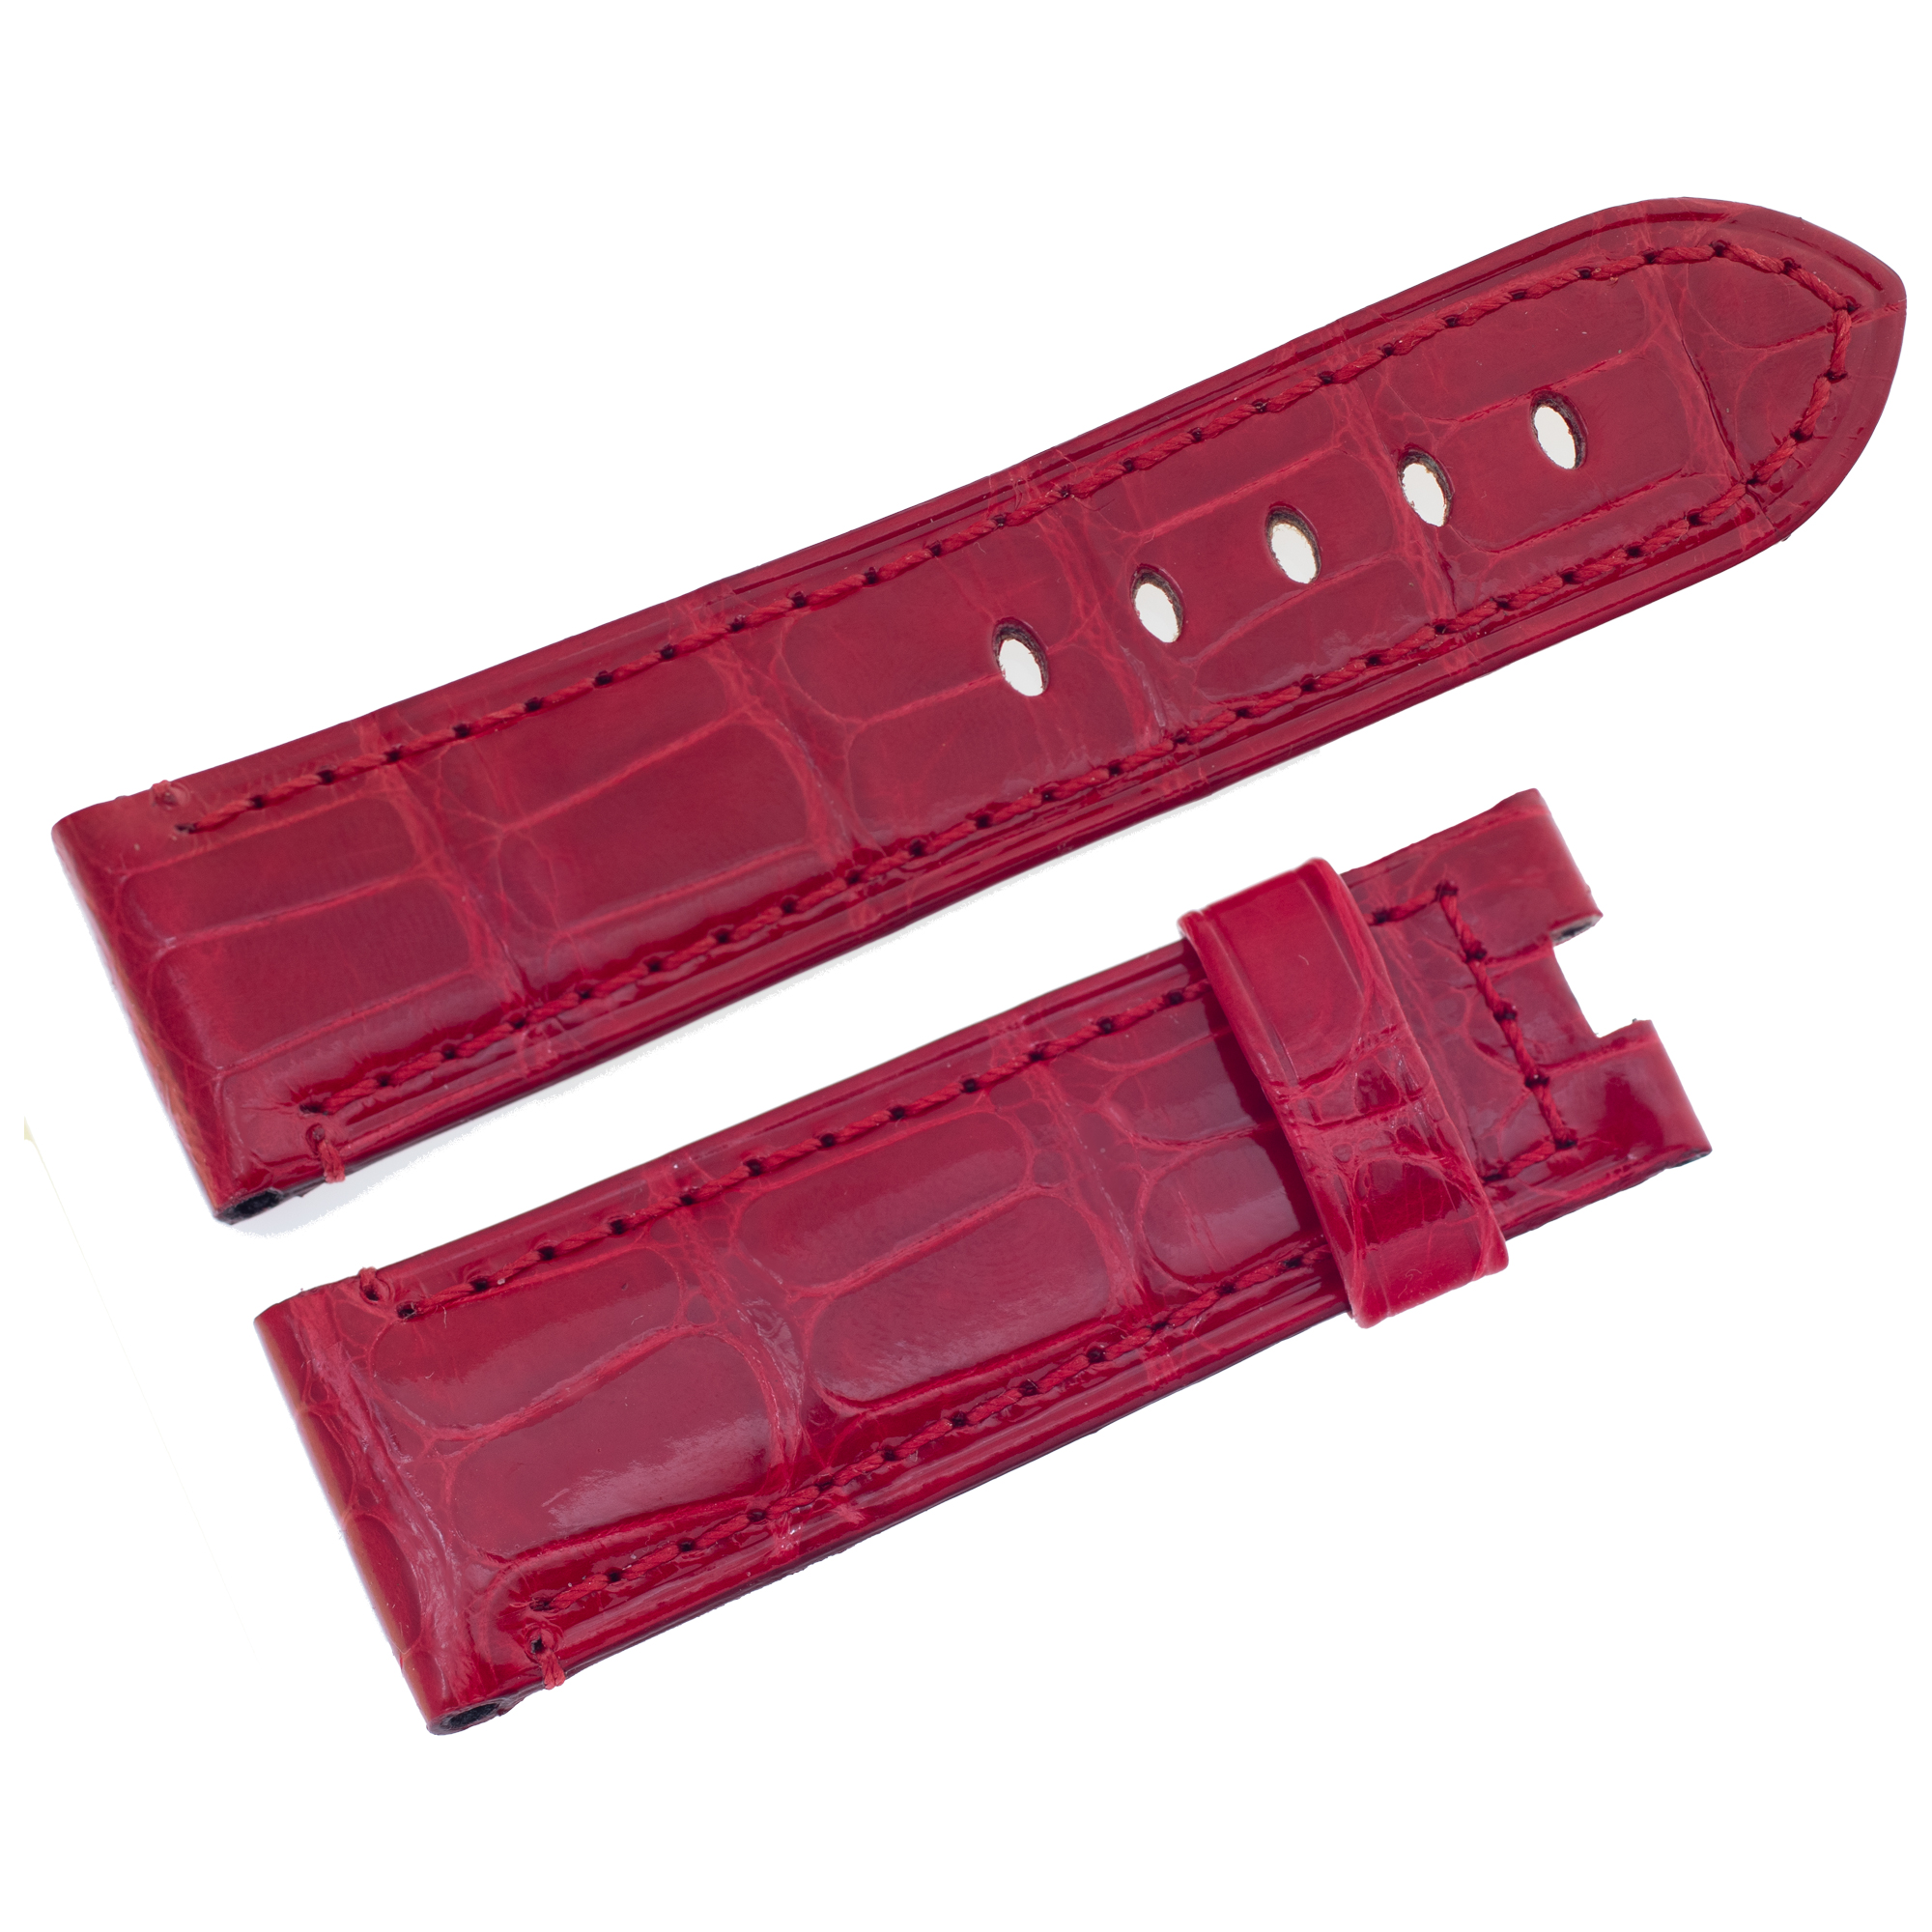 Panerai cherry red alligator strap for tang buckle (22mm x 20mm)